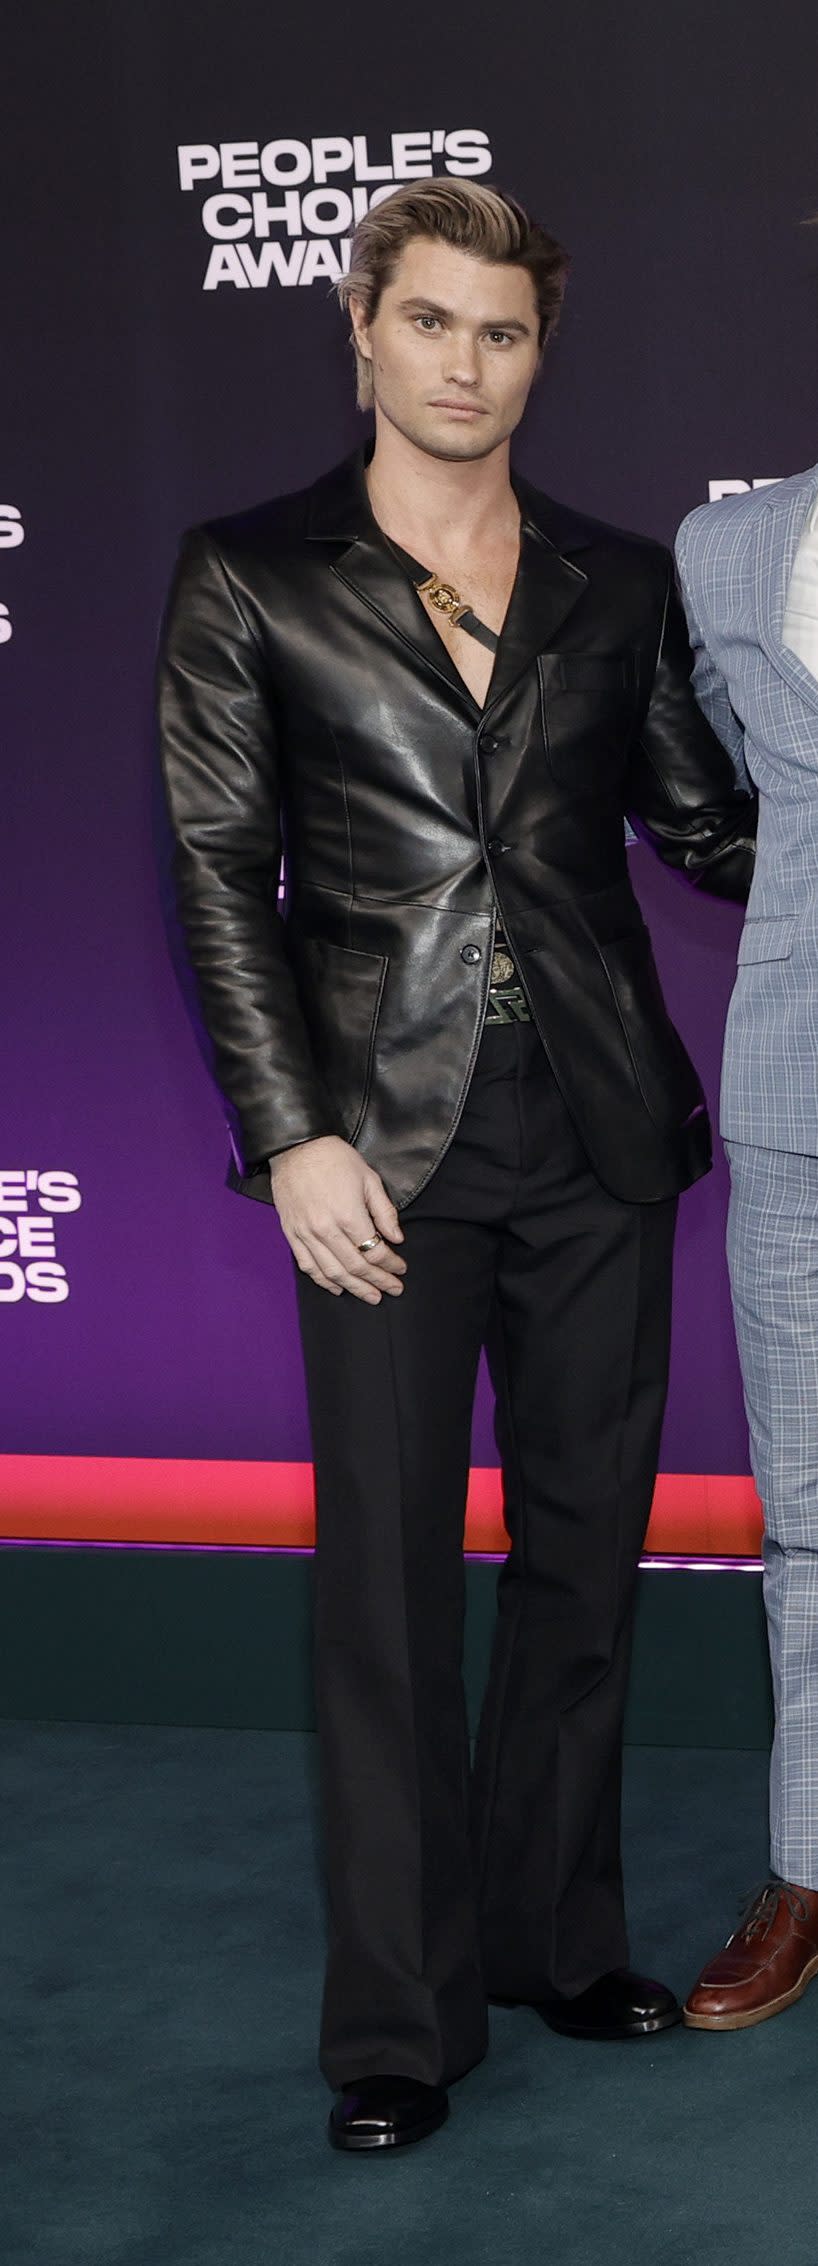 Chase Stokes versace suit, 2021 People's Choice Awards, PCAs, red carpet, celebrity style,